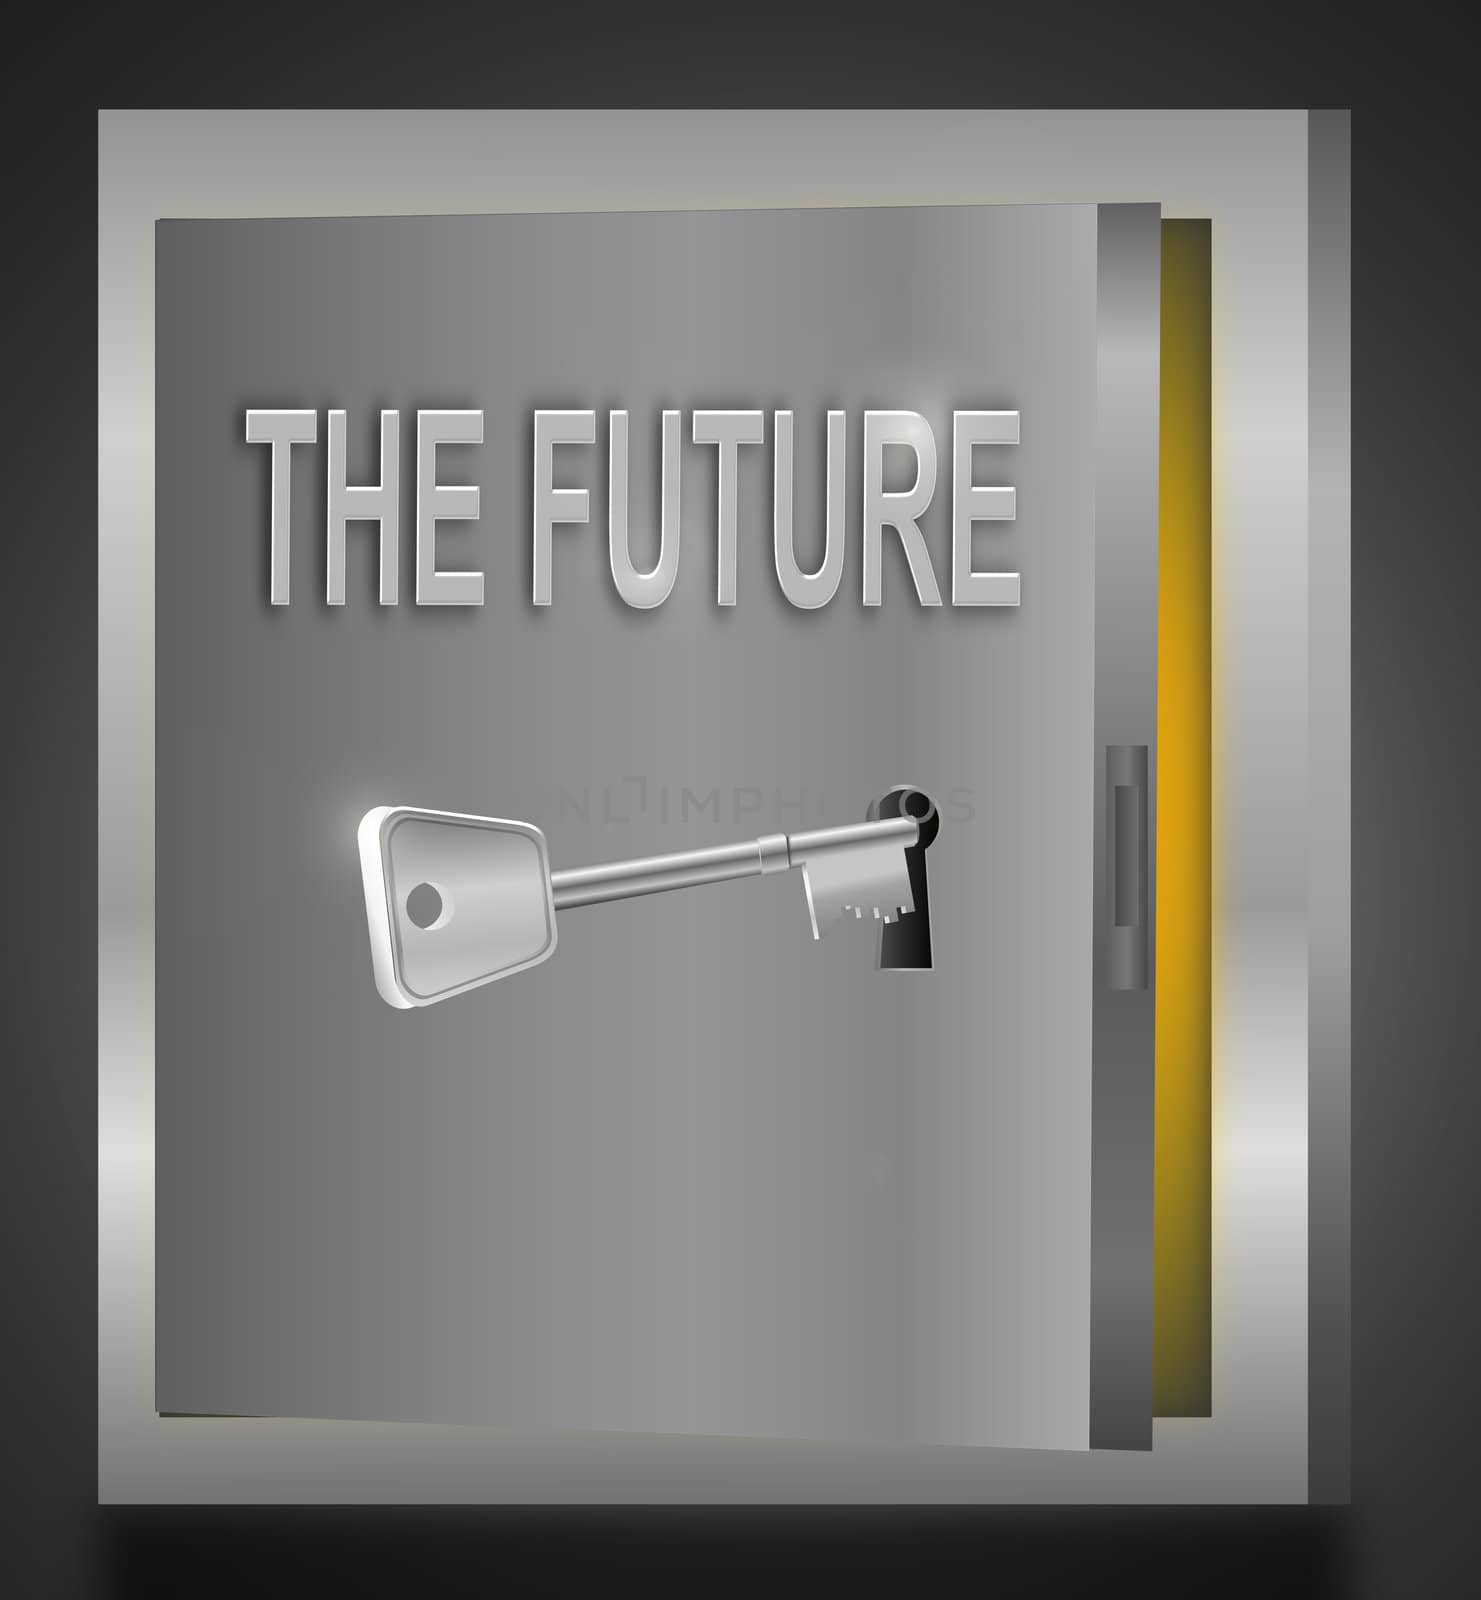 Illustration depicting a steel door with the words 'The future' being opened by a metallic key.